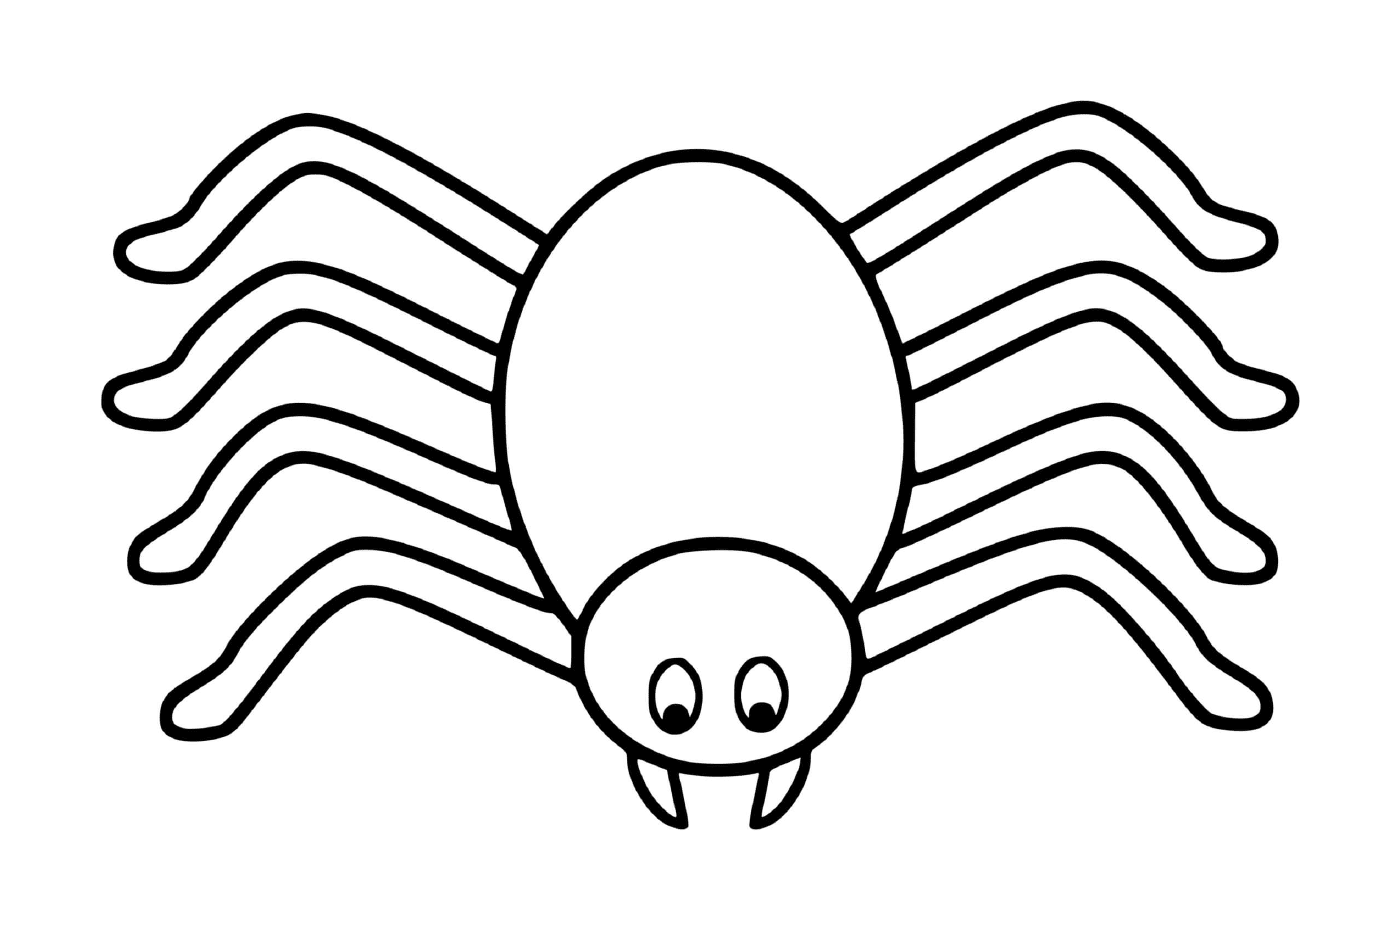  A simple and easy spider 